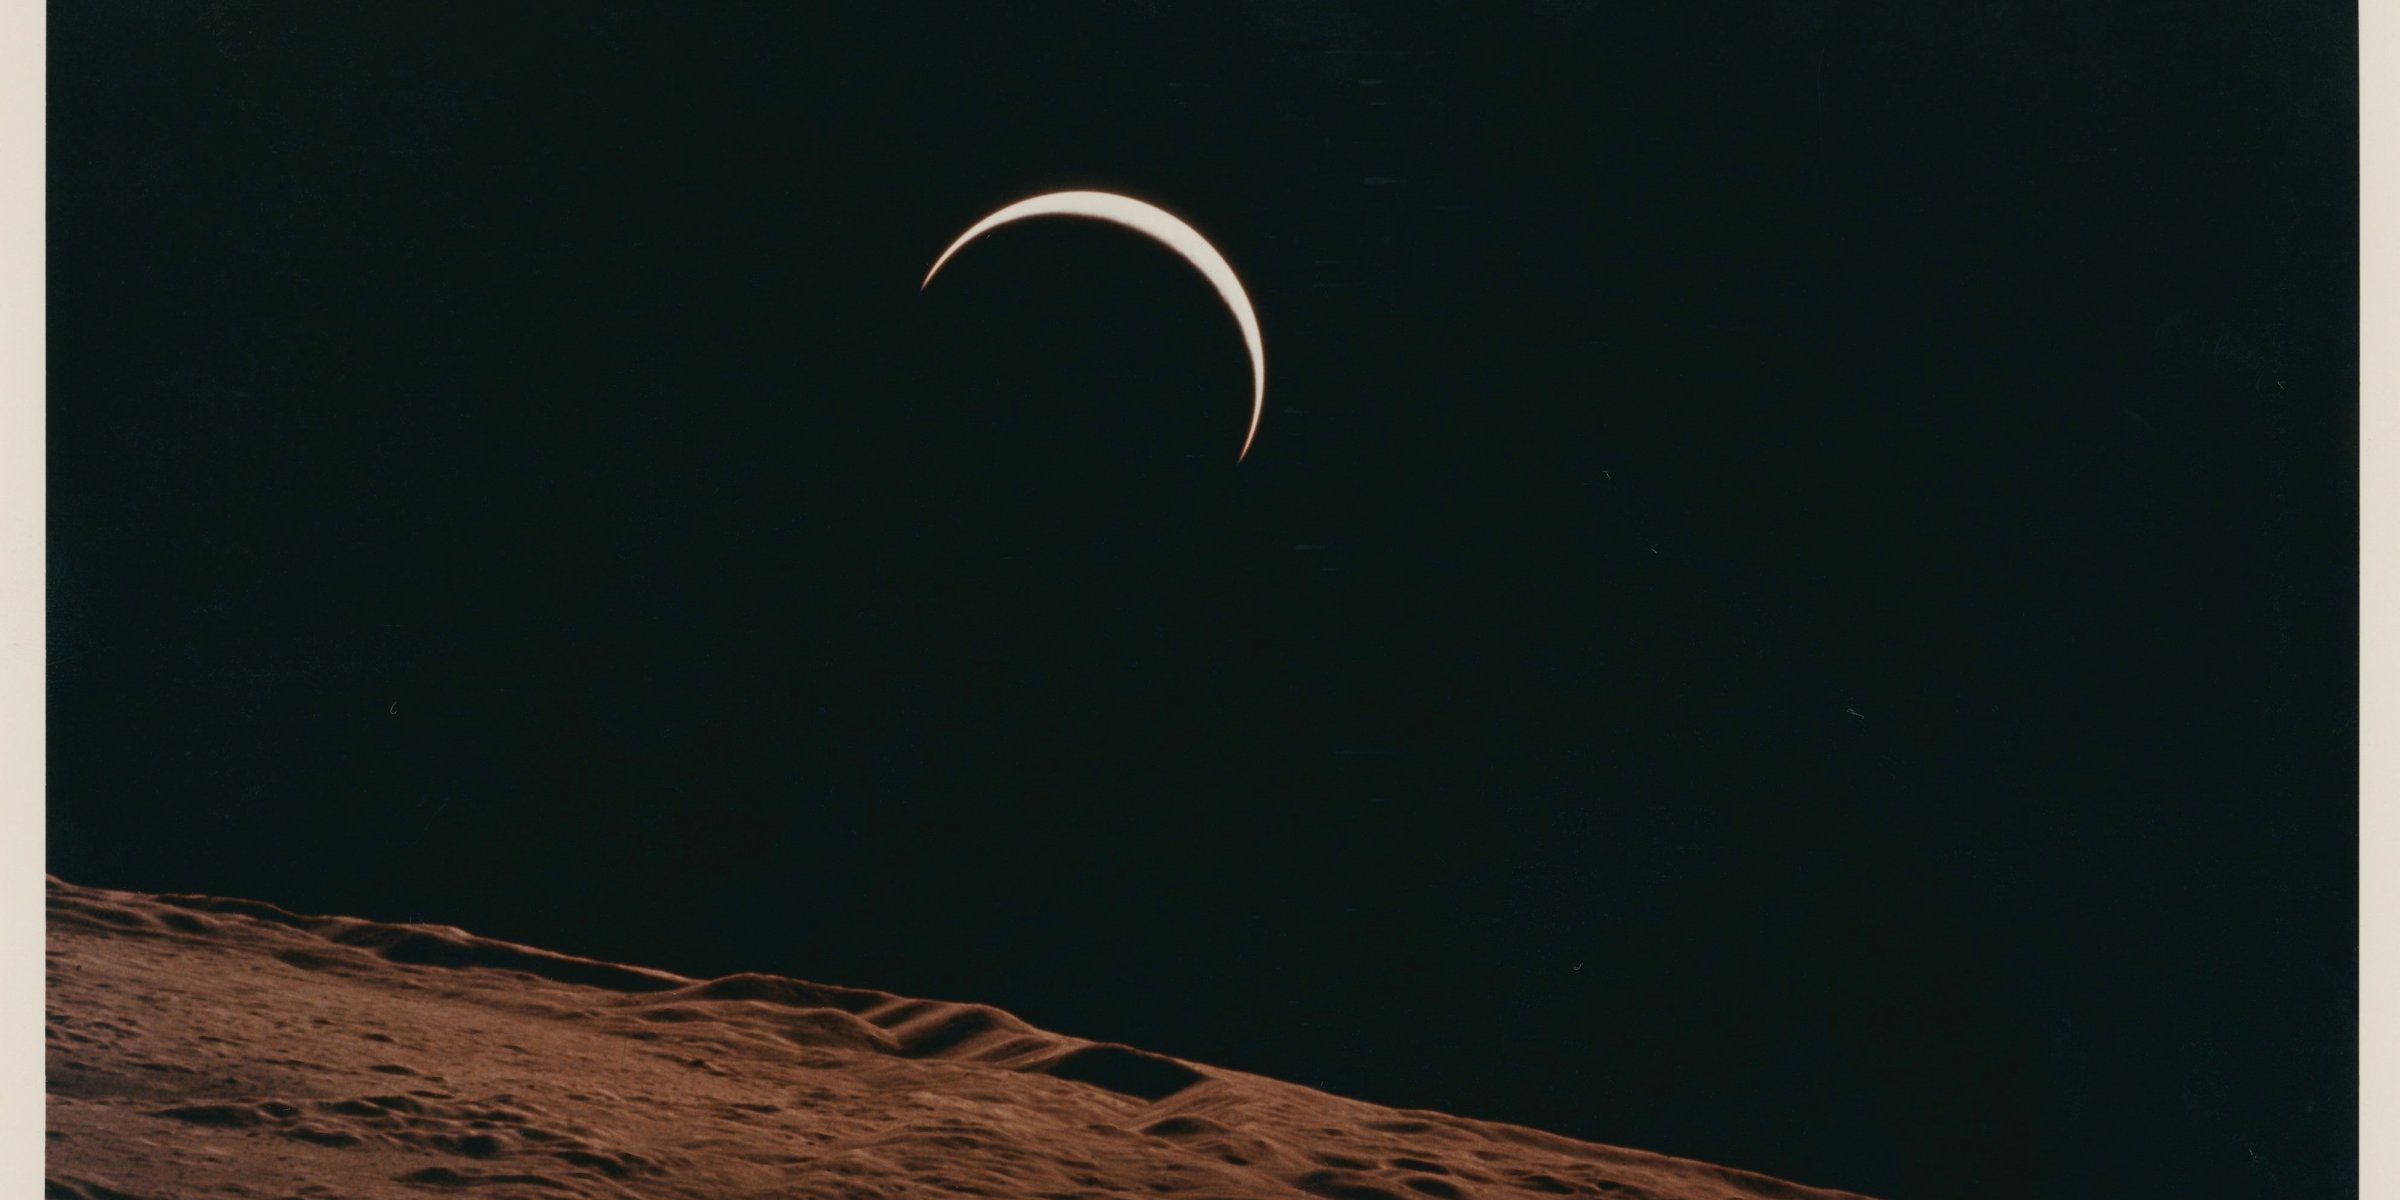 'Golden age' of space exploration Armstrong, rare moon photos up for